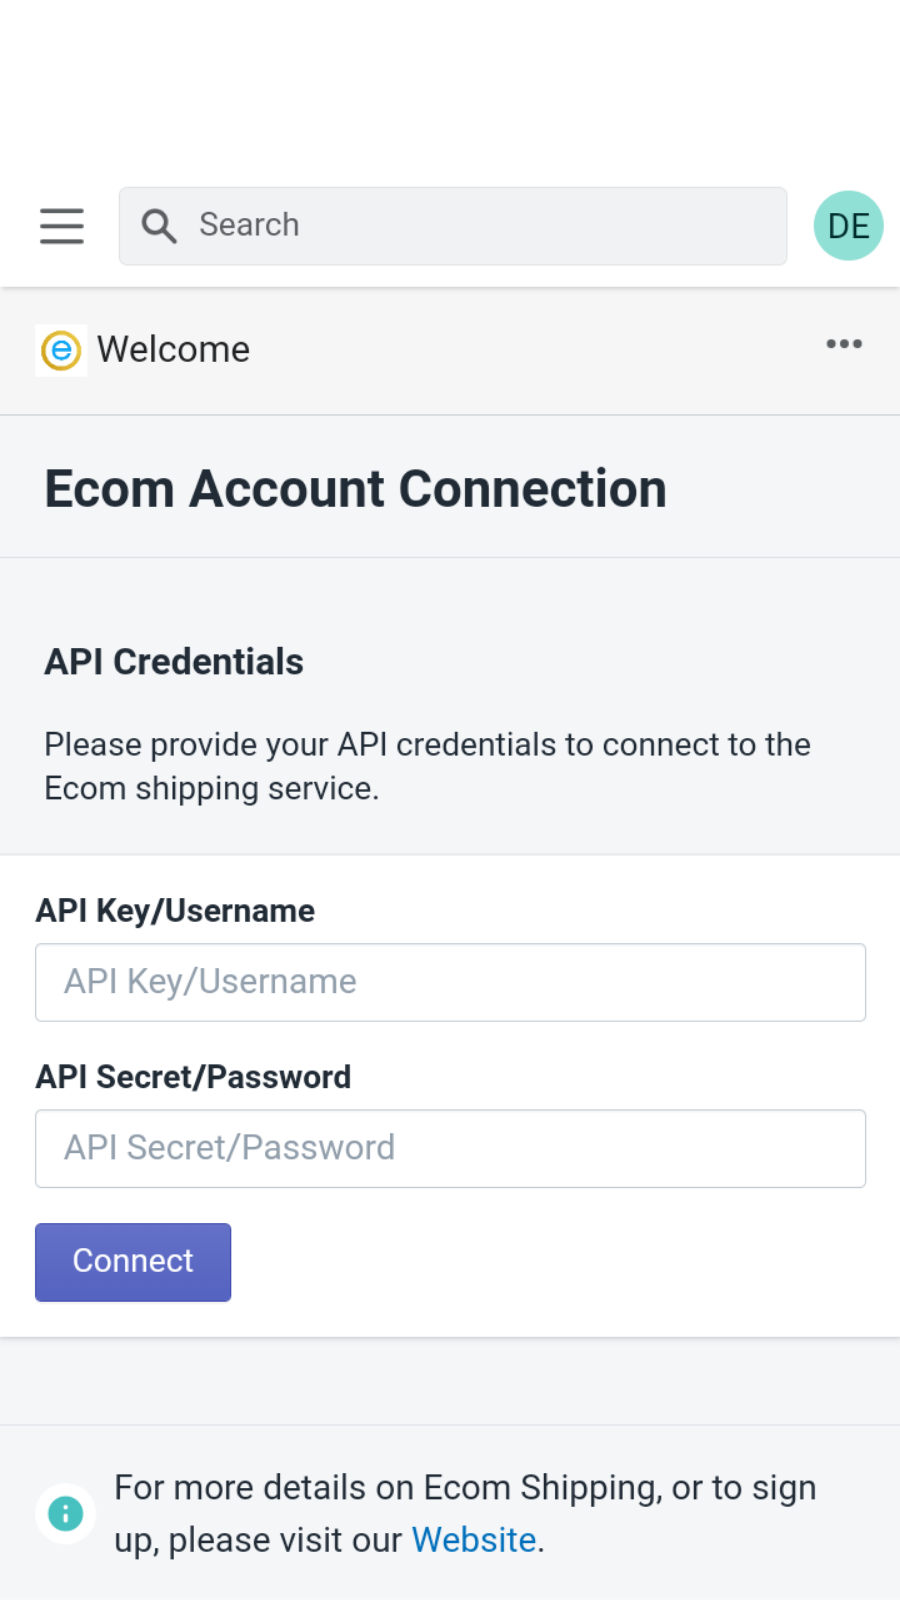 Enter credentials to connect with our service